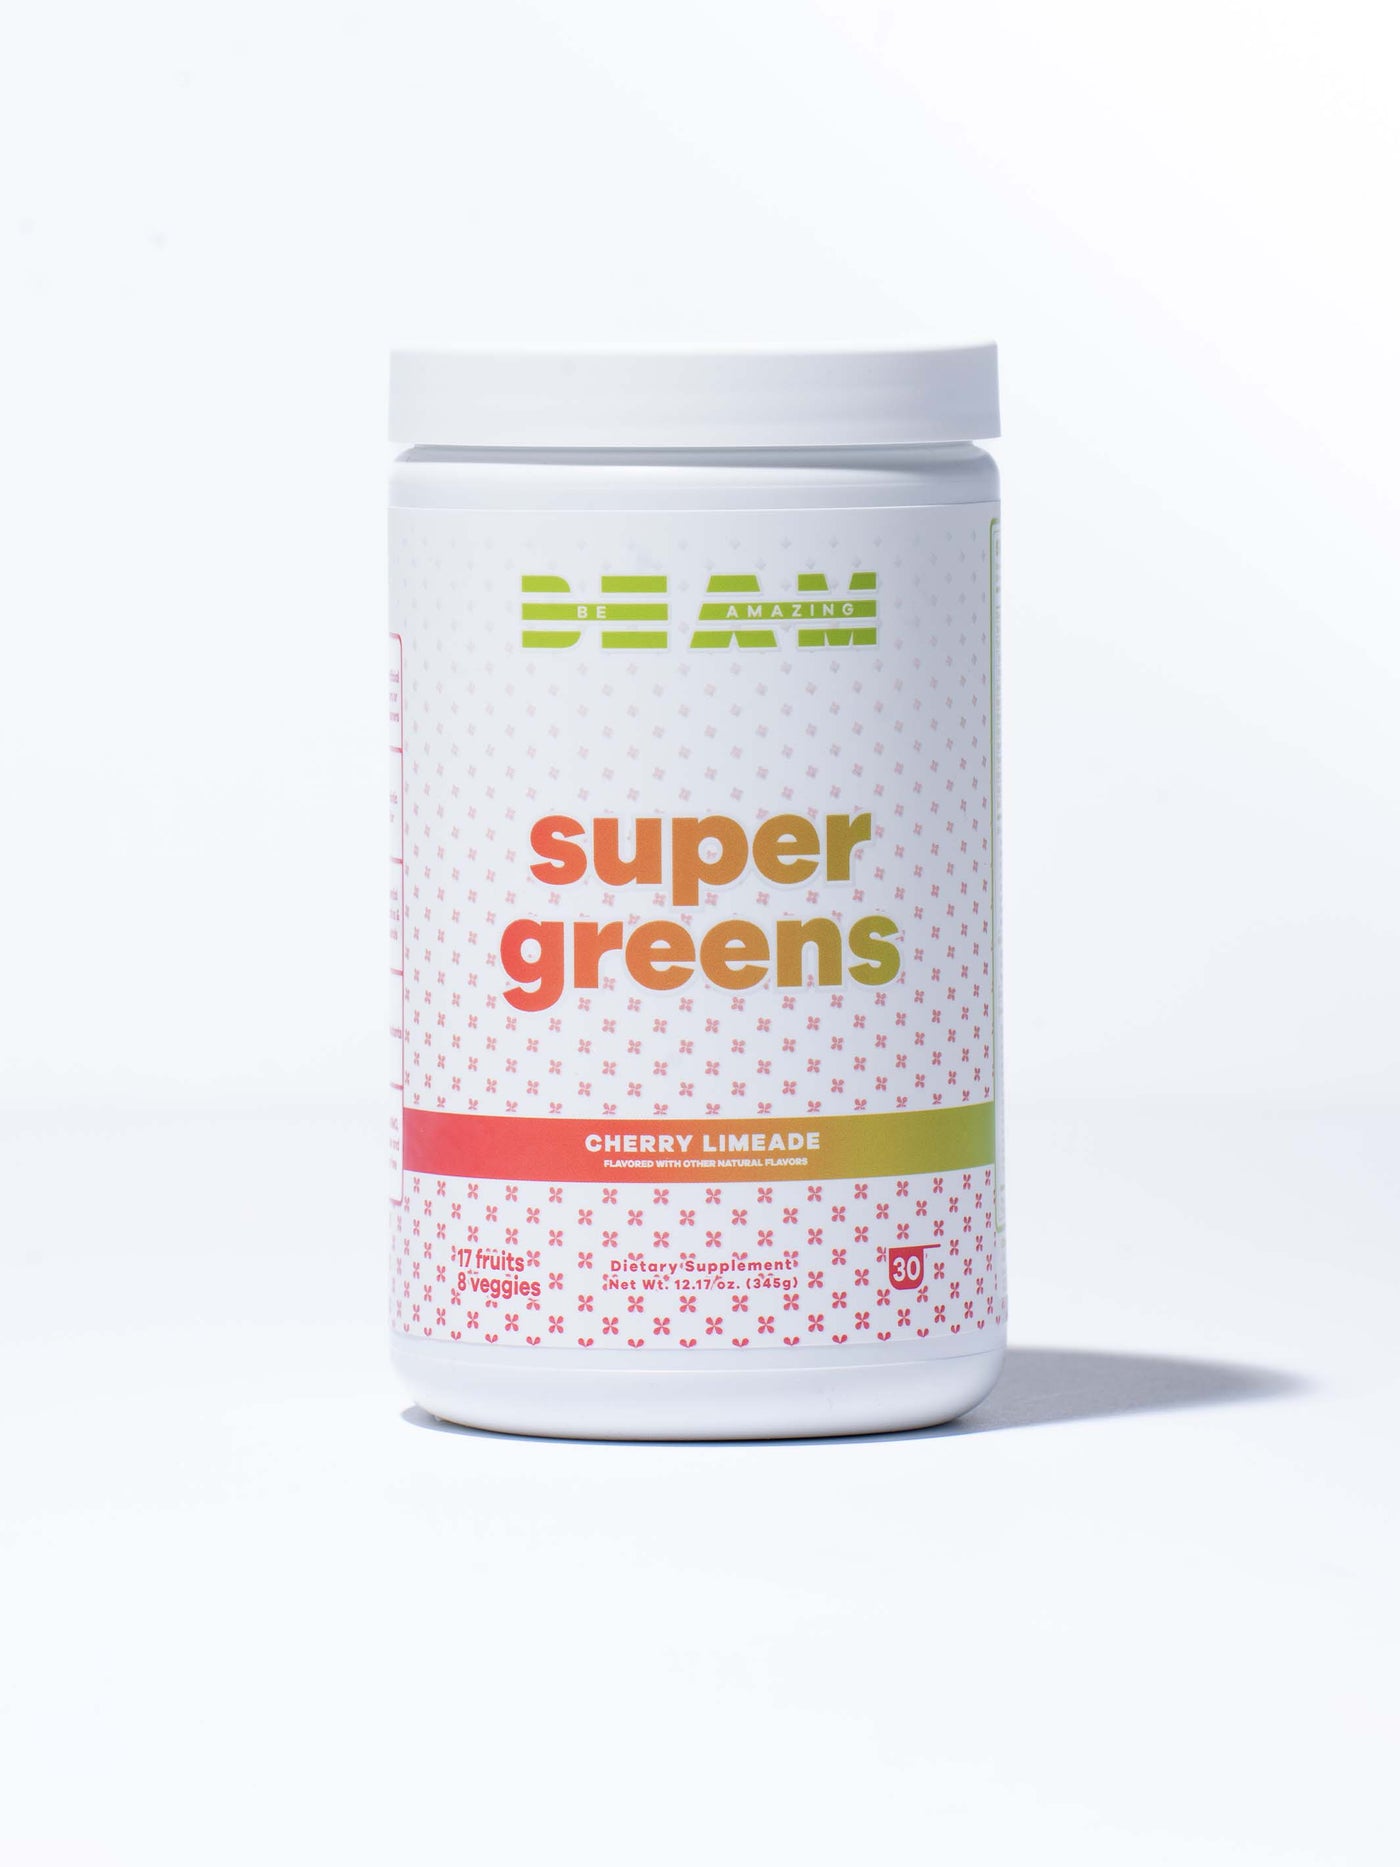 beam be amazing cherry limeade super greens front 1# 30 Servings / Cherry Limeade